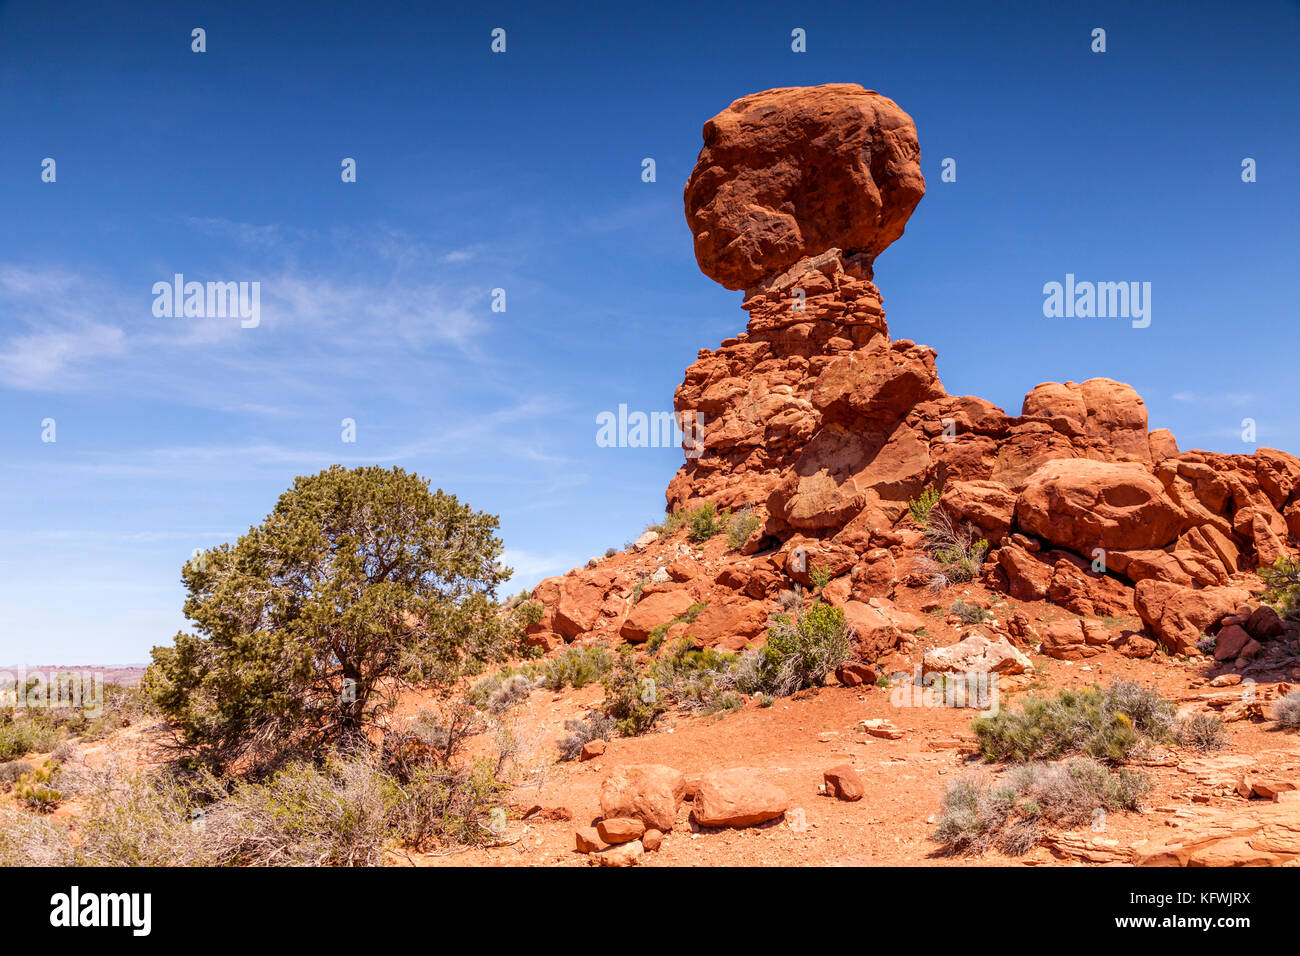 The eroded sandstone formation known as Balanced Rock, Arches National Park, Utah, USA, beautifully balanced by the nearby bush, on a bright spring da Stock Photo